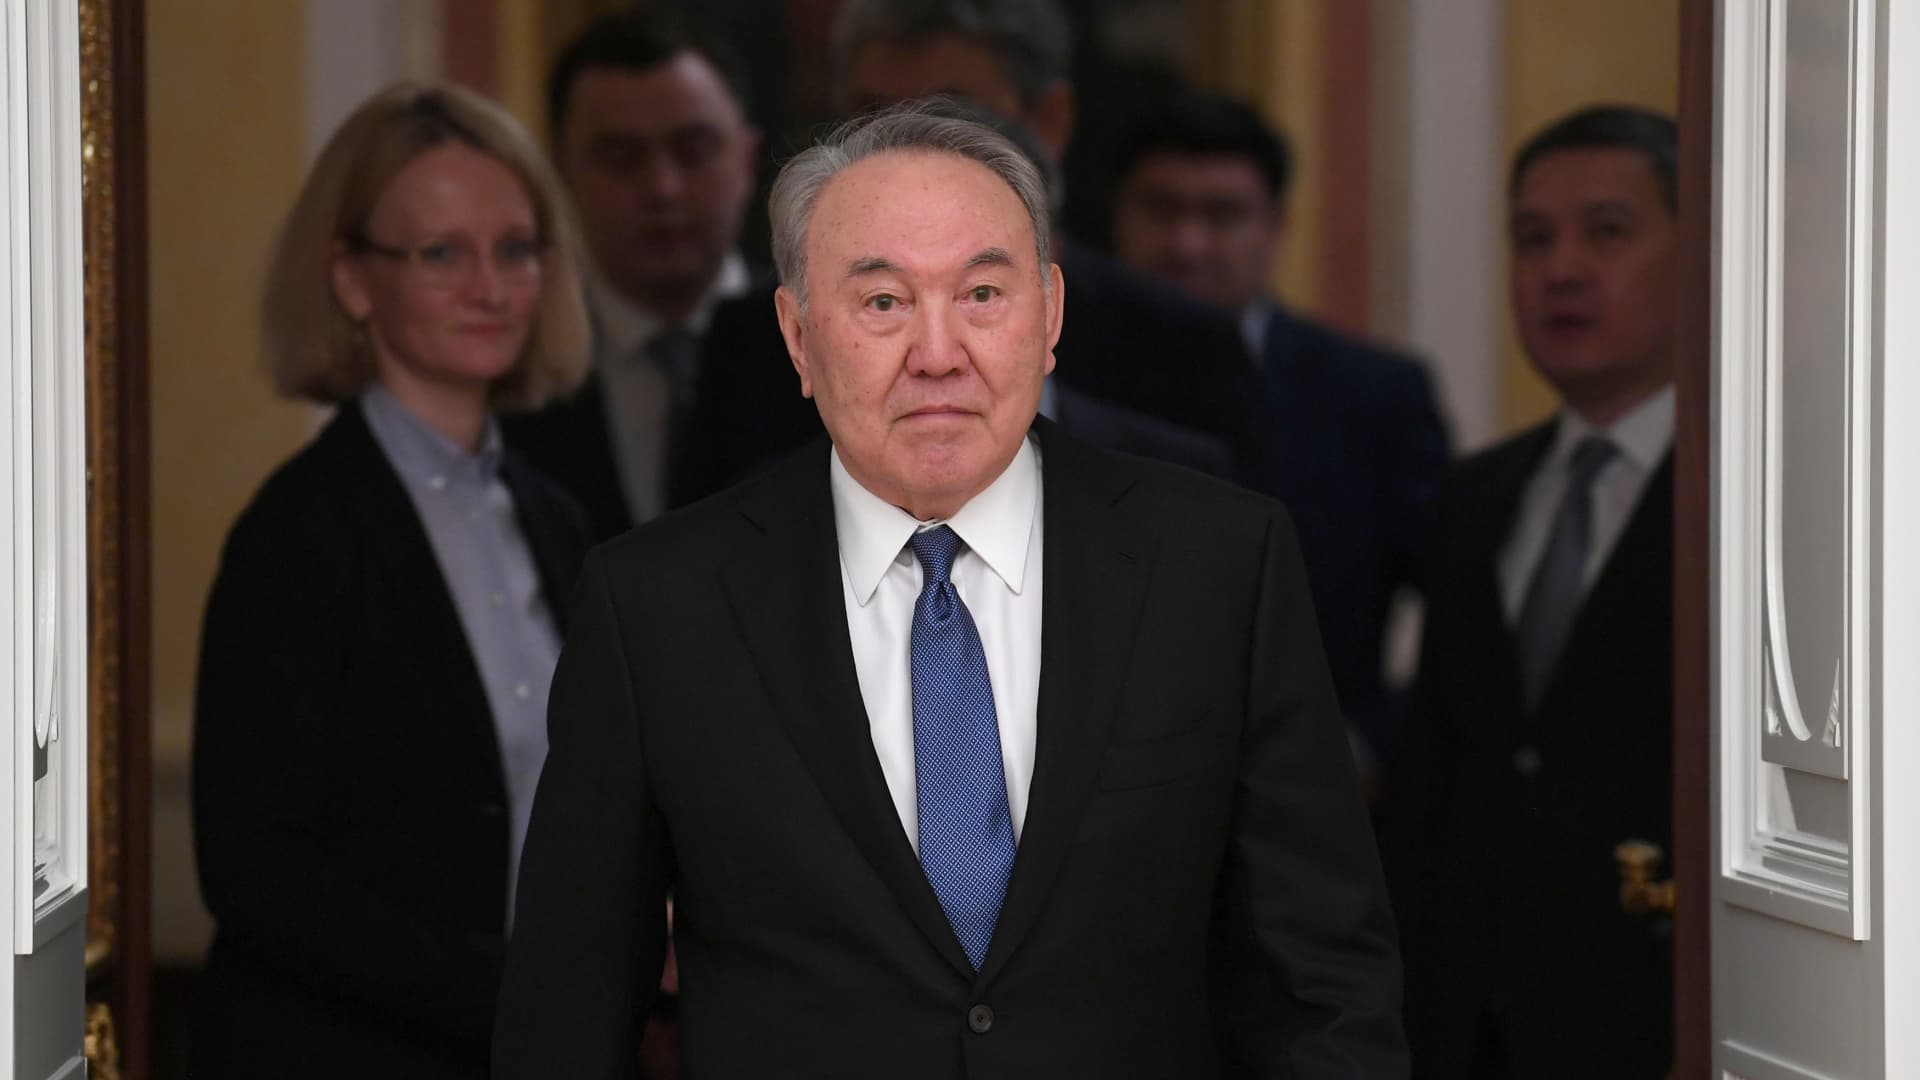 Kazakh former President Nursultan Nazarbayev attends a meeting with Russian President Vladimir Putin in Moscow, Russia March 10, 2020.